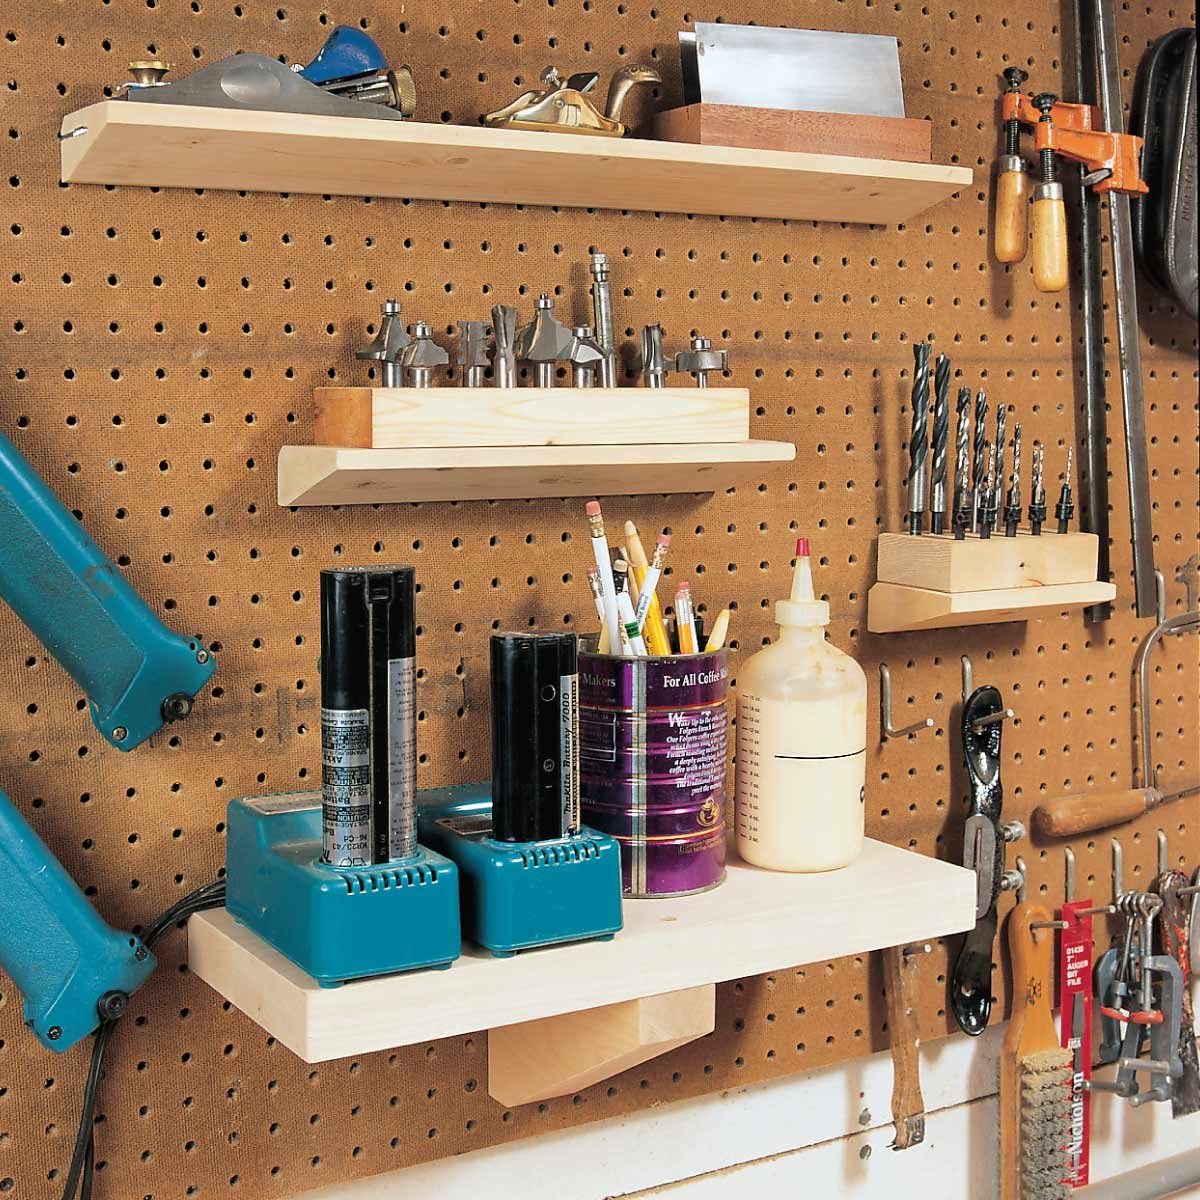 Small Workshop Storage and Space-Saving Solutions | Family Handyman